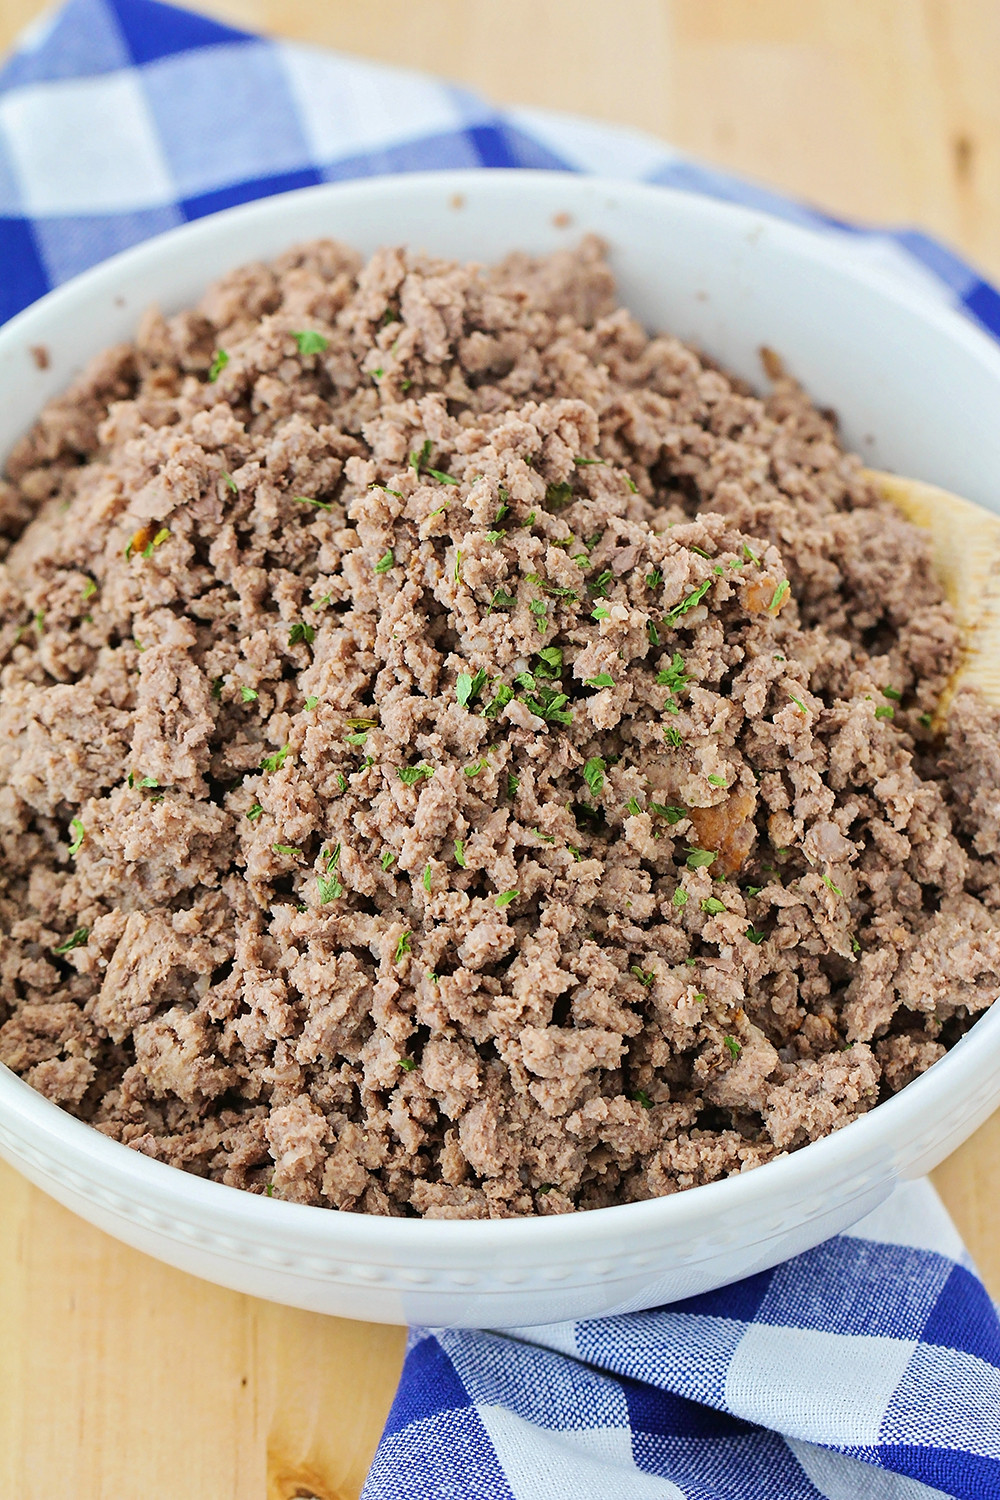 Quickly Thaw Ground Beef
 The Baker Upstairs How to Cook Frozen Ground Beef in the